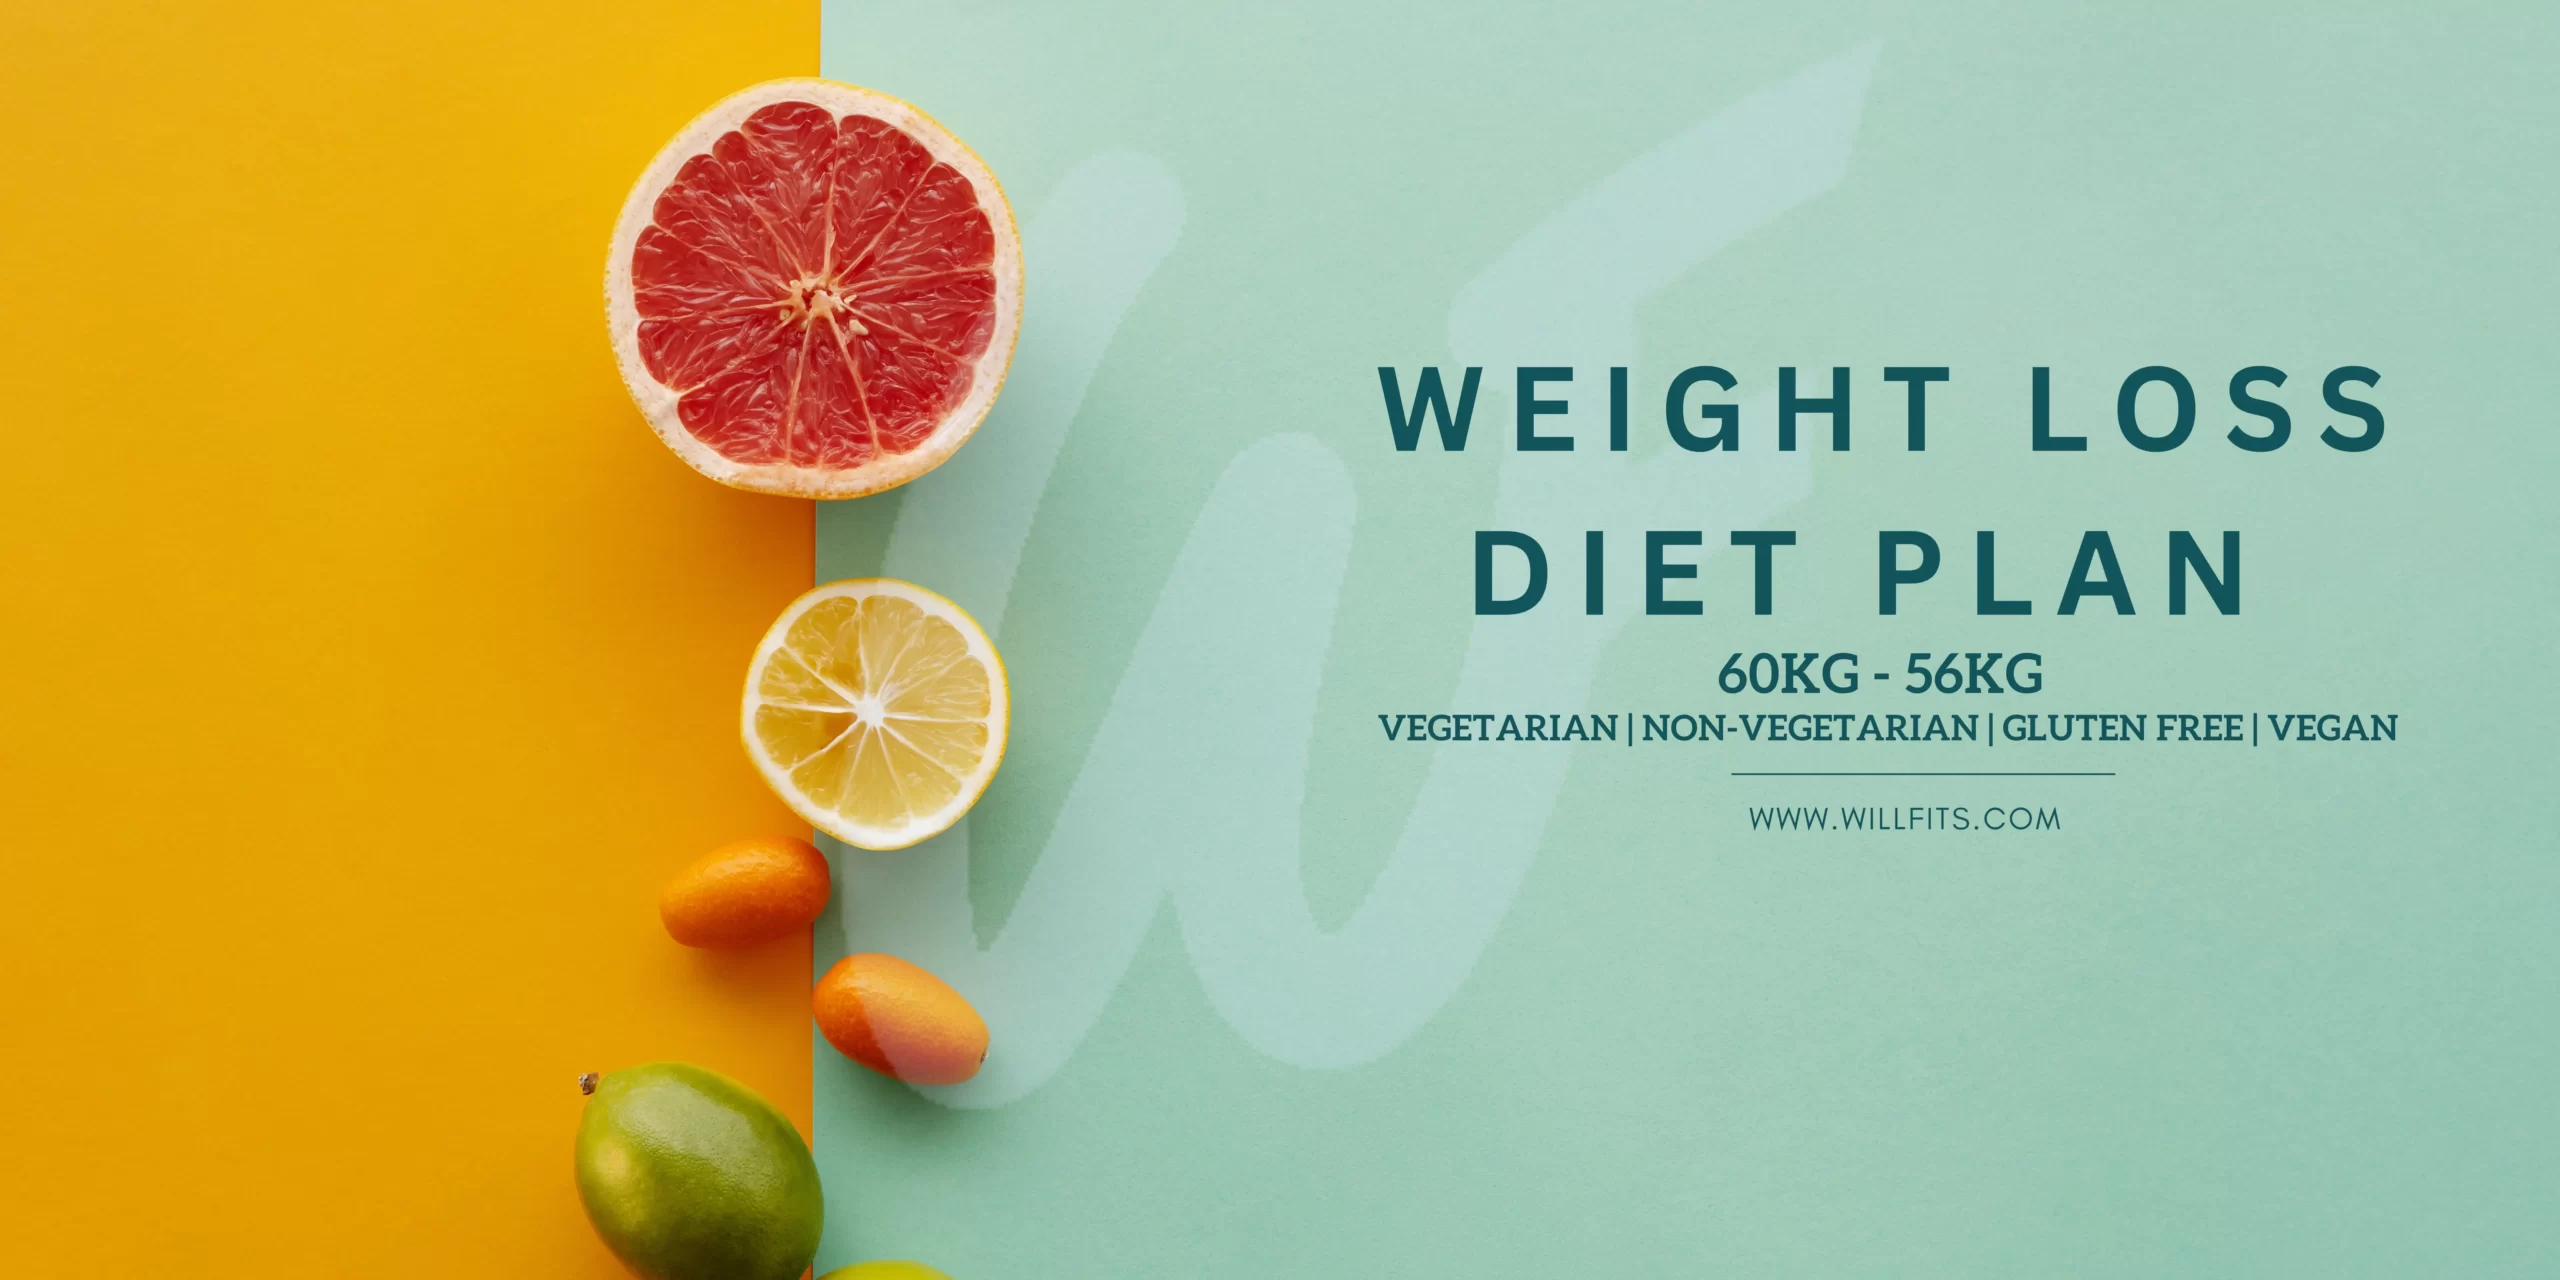 You are currently viewing Weight Loss Diet Plan 60KG – 56KG With Willfits.com